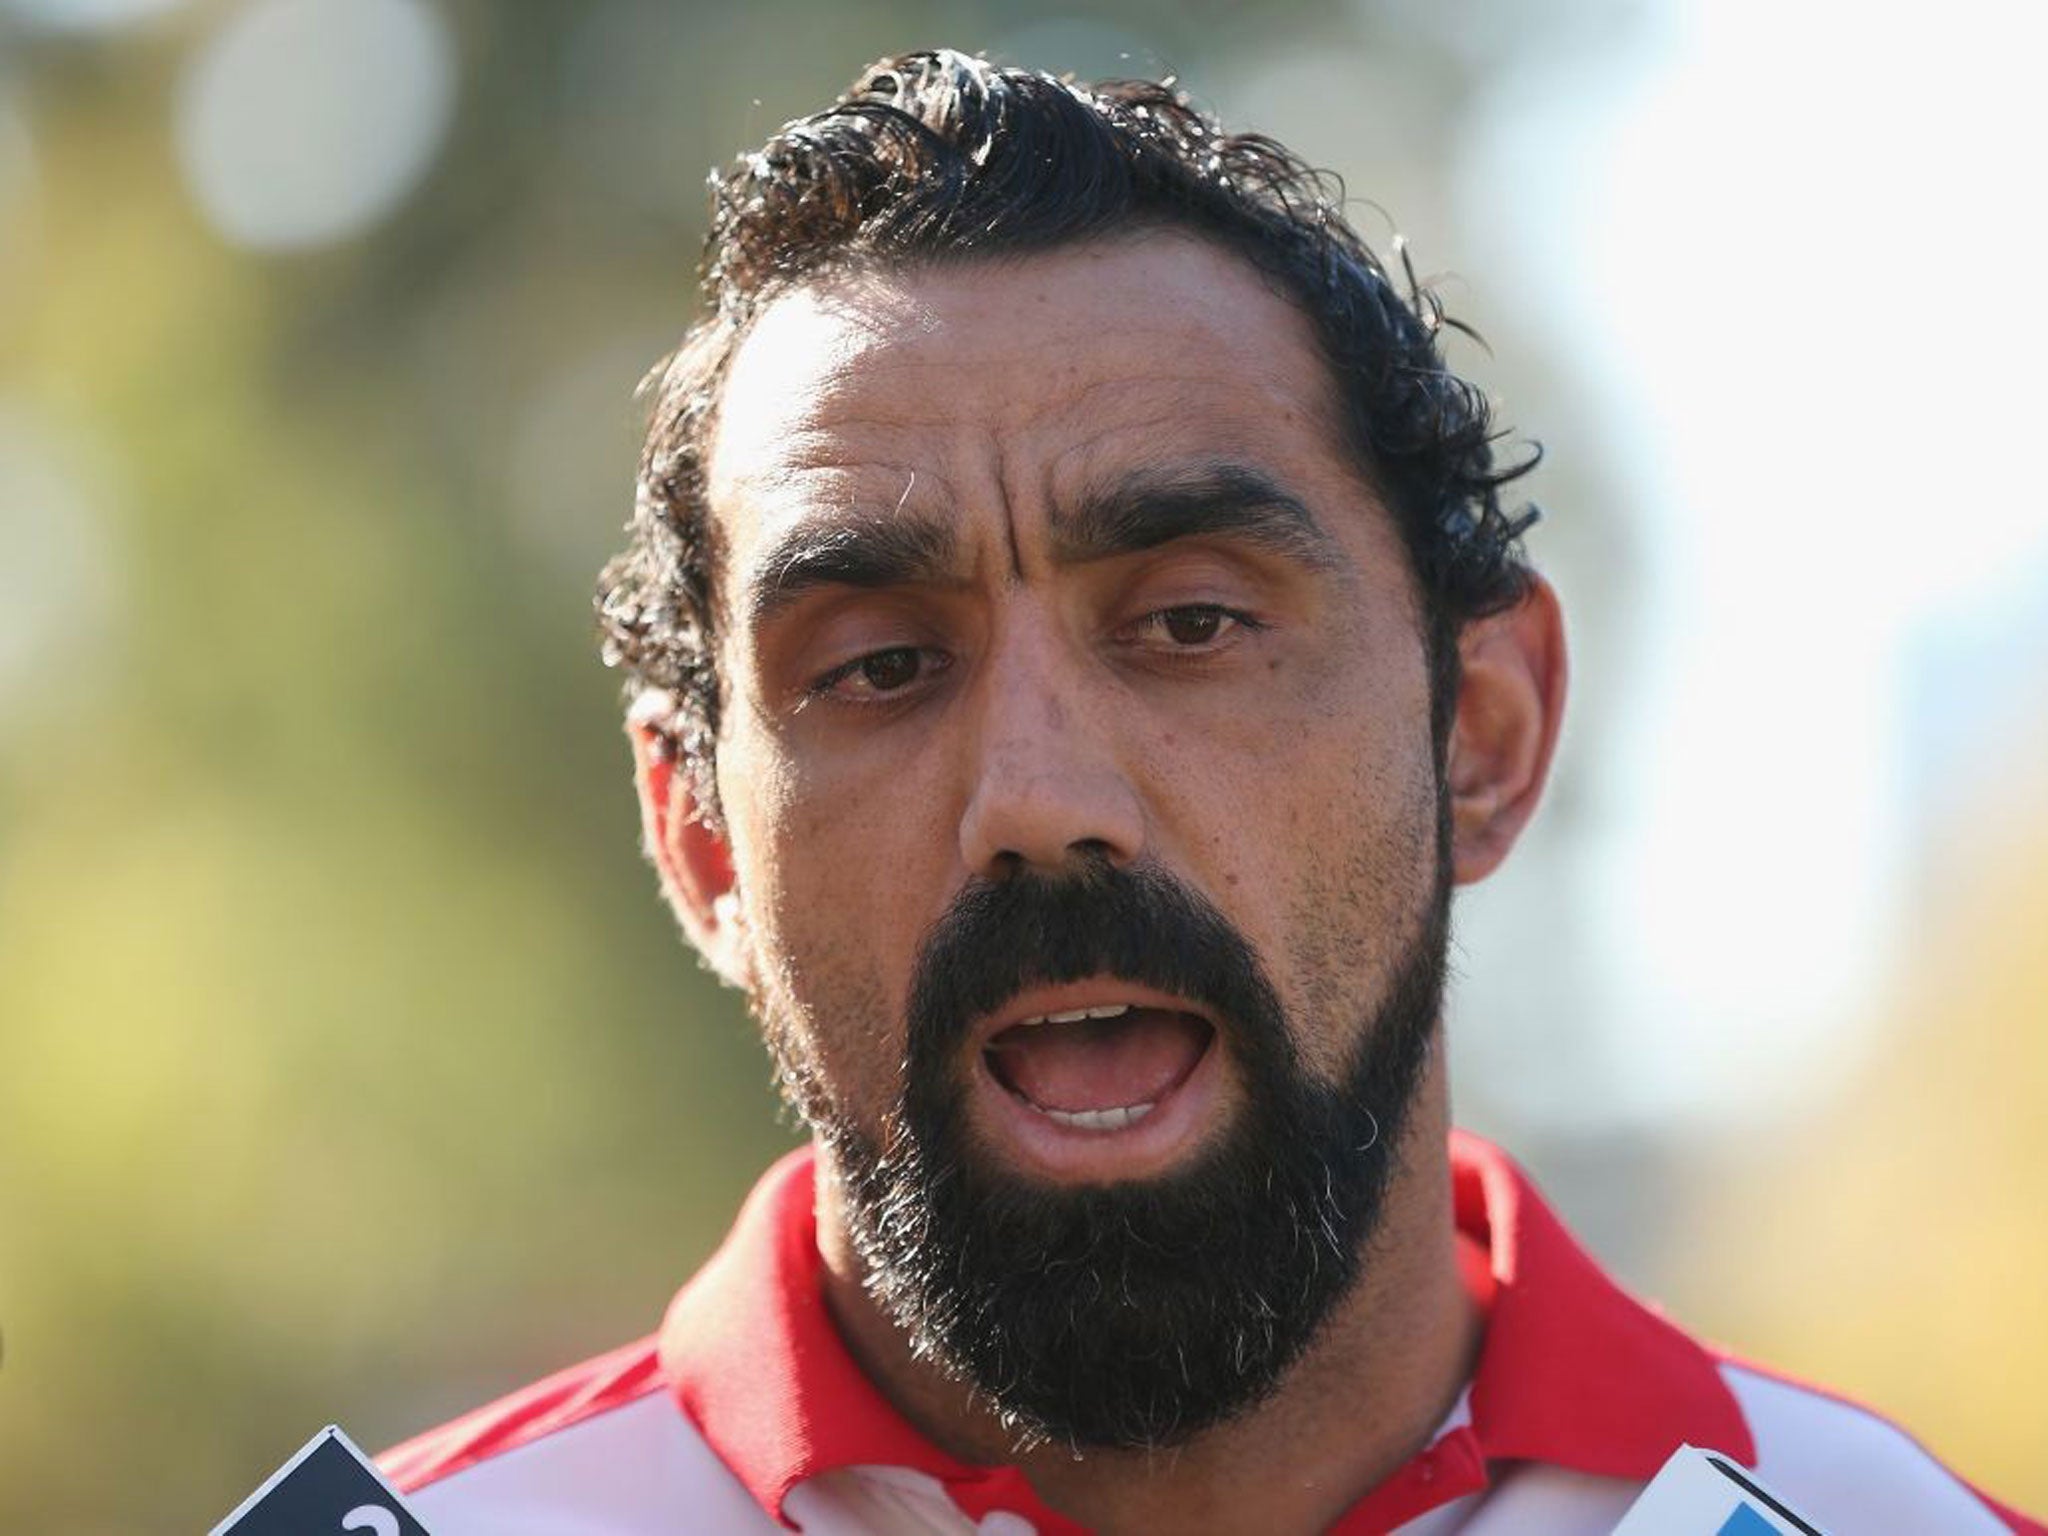 The girl has since apologised for the comment and Goodes, one of the country's top sportsmen, has urged support for the young fan.